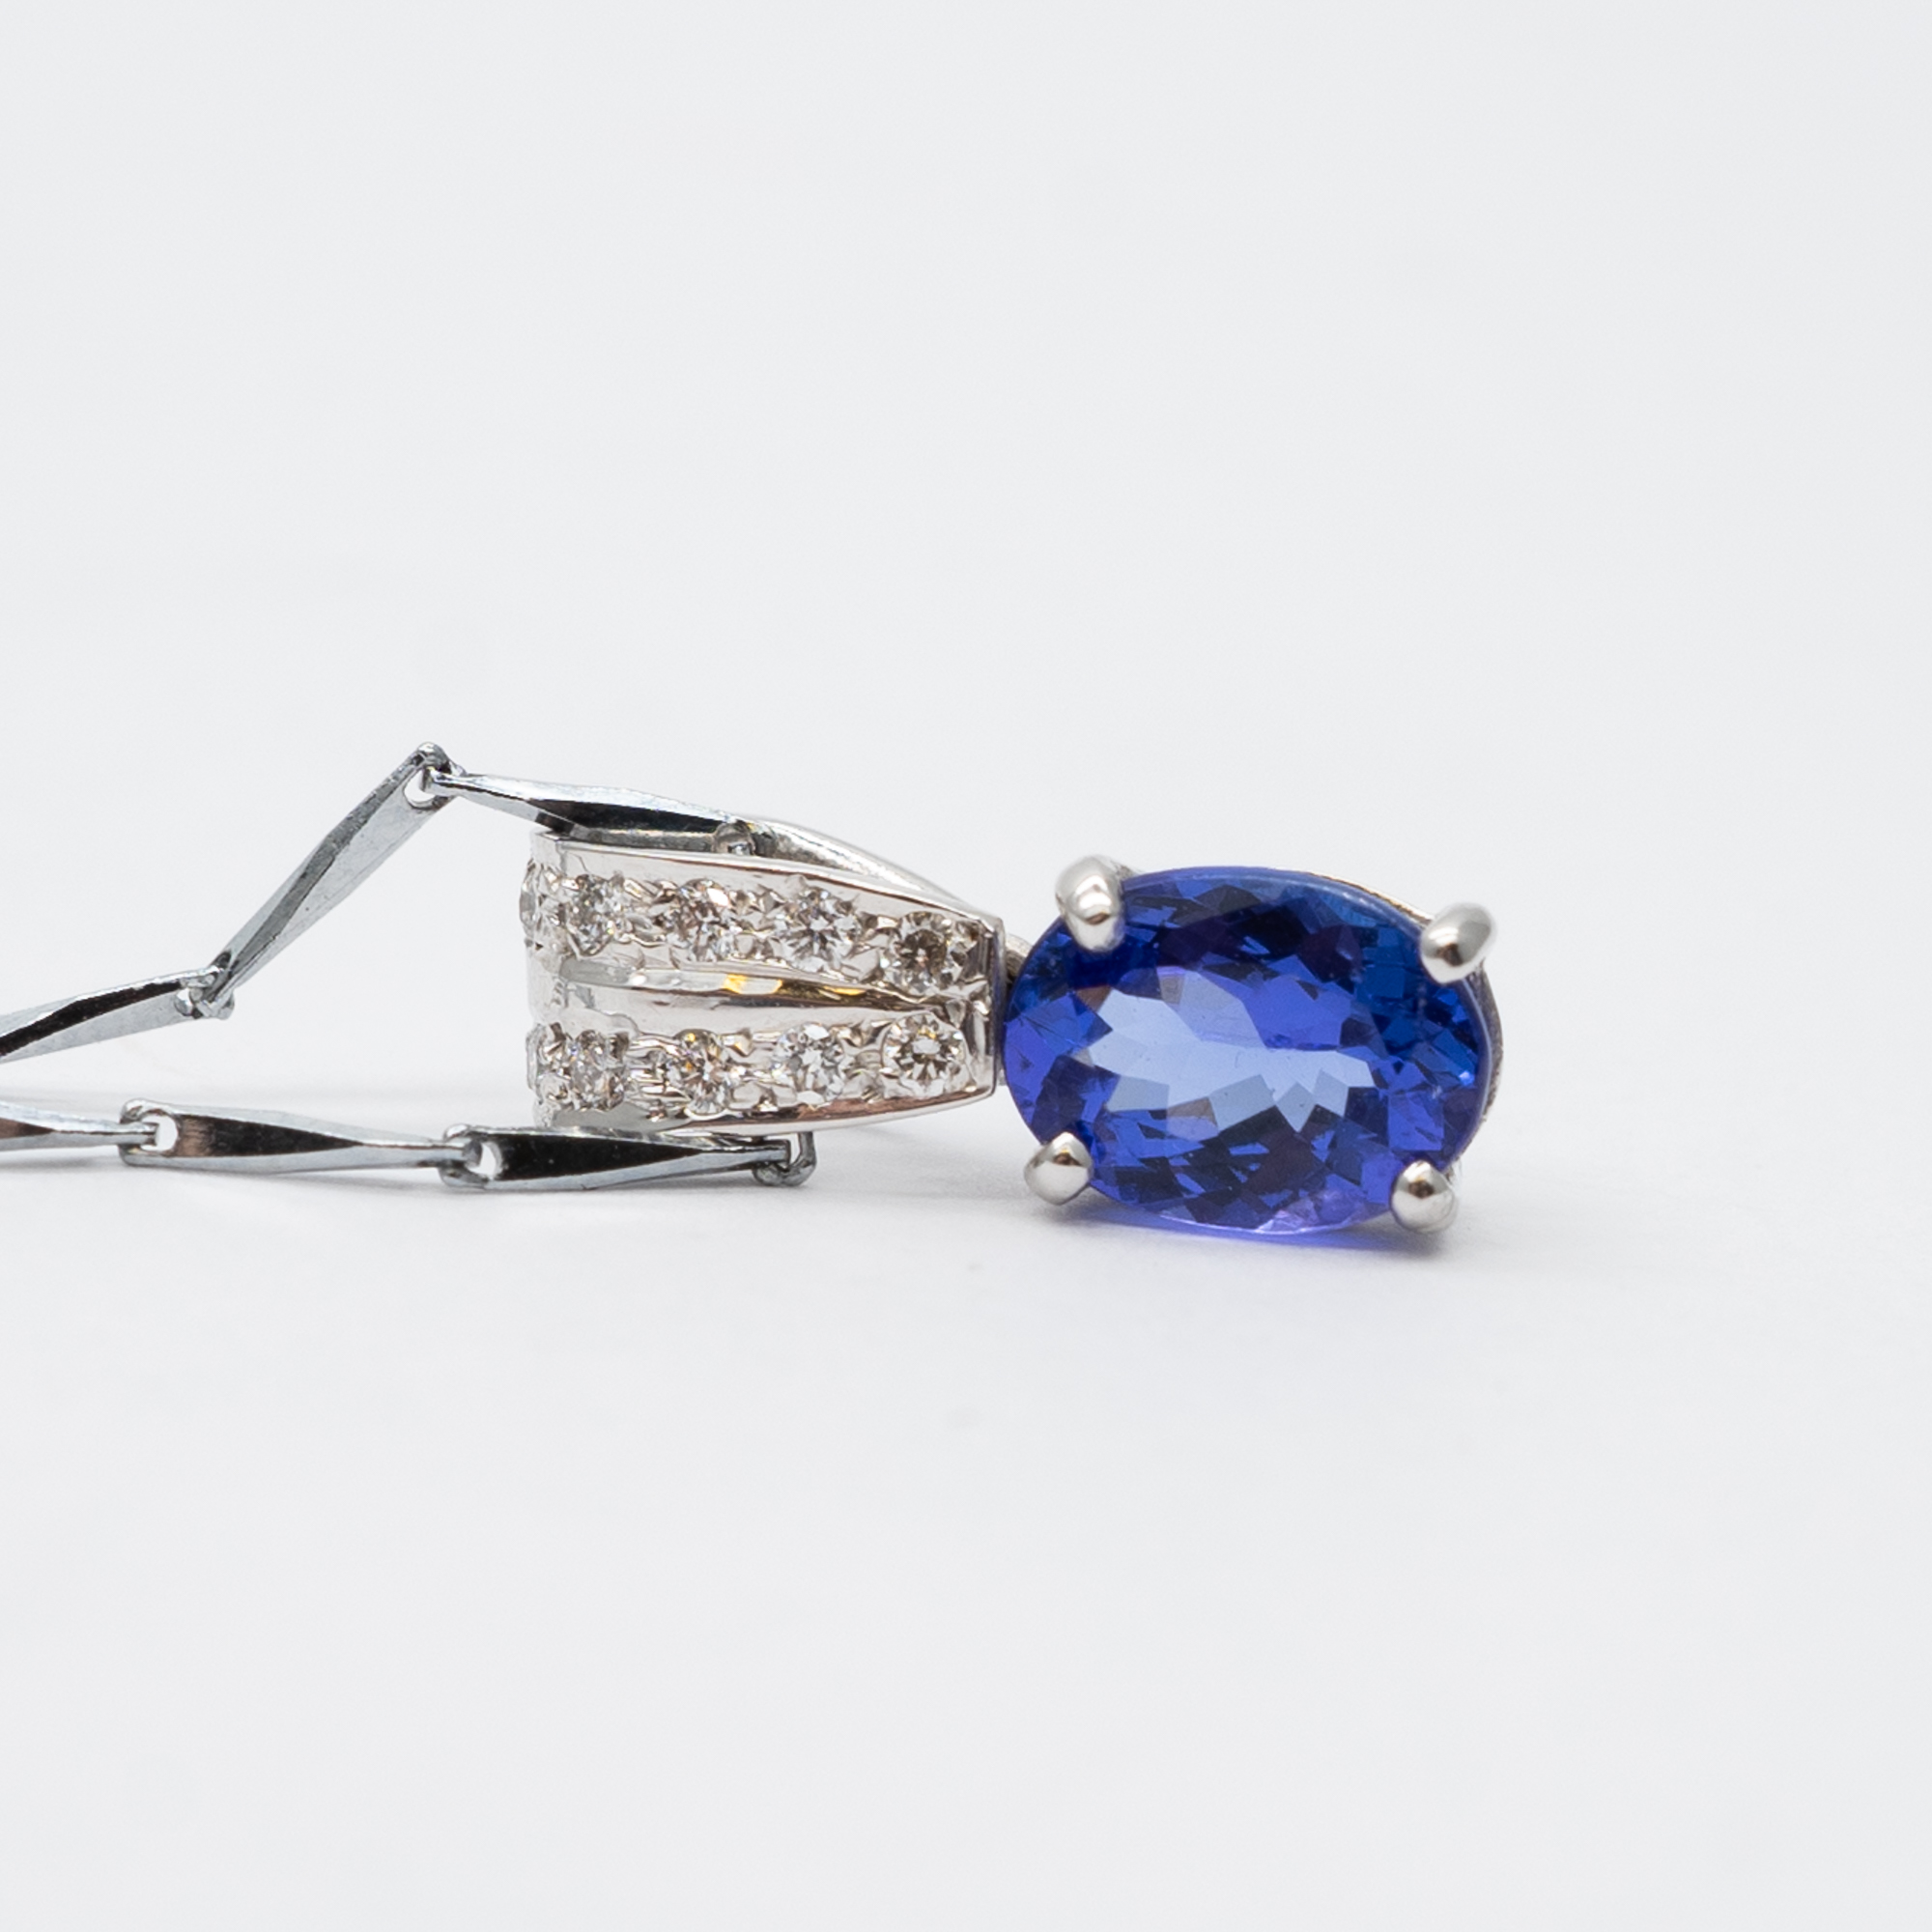 A 9ct white gold tanzanite and diamond pendant and chain - Image 2 of 4